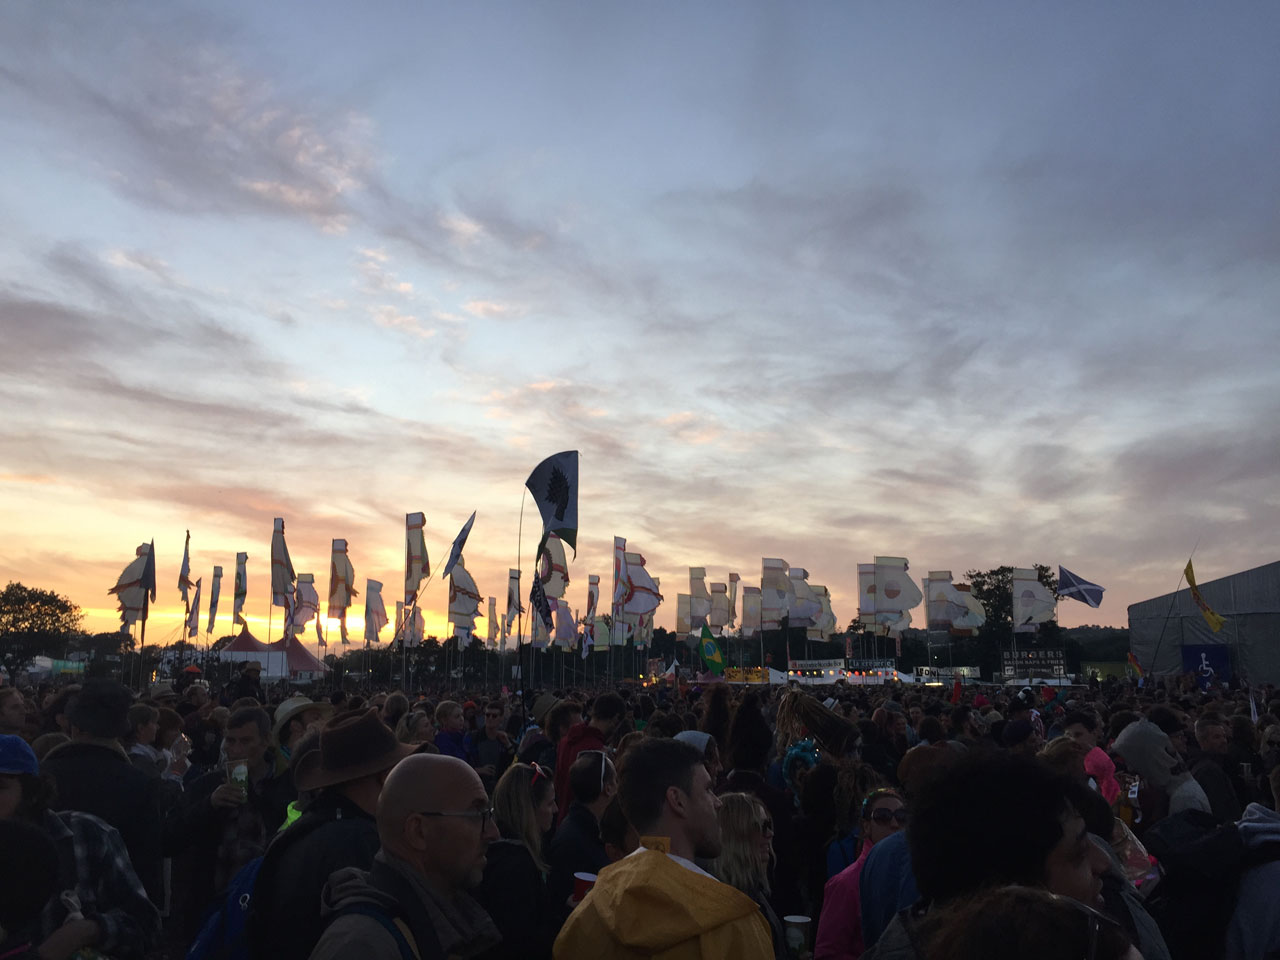 The sun sets over the West Holts field at Glastonbury 2015